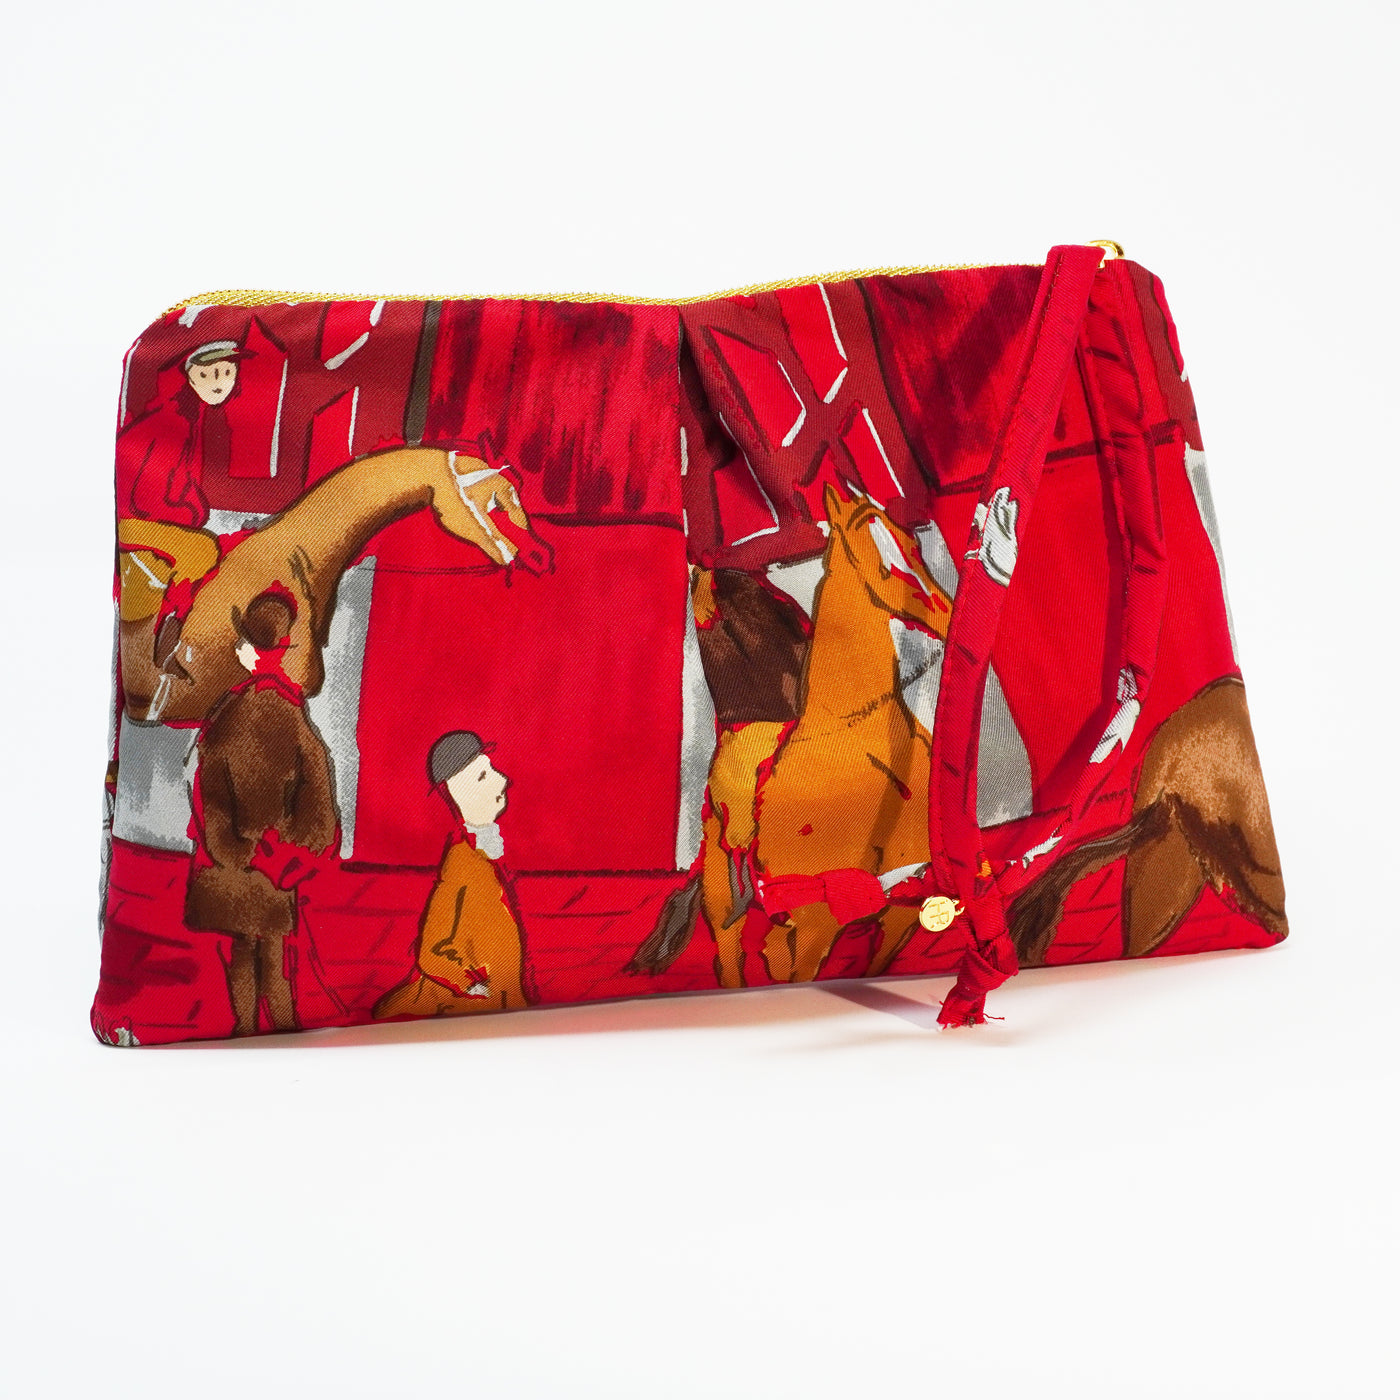 "Paddock" Scarf Bag (Upcycled from Hermes Scarf) Party Clutch Hampton Road Designs   